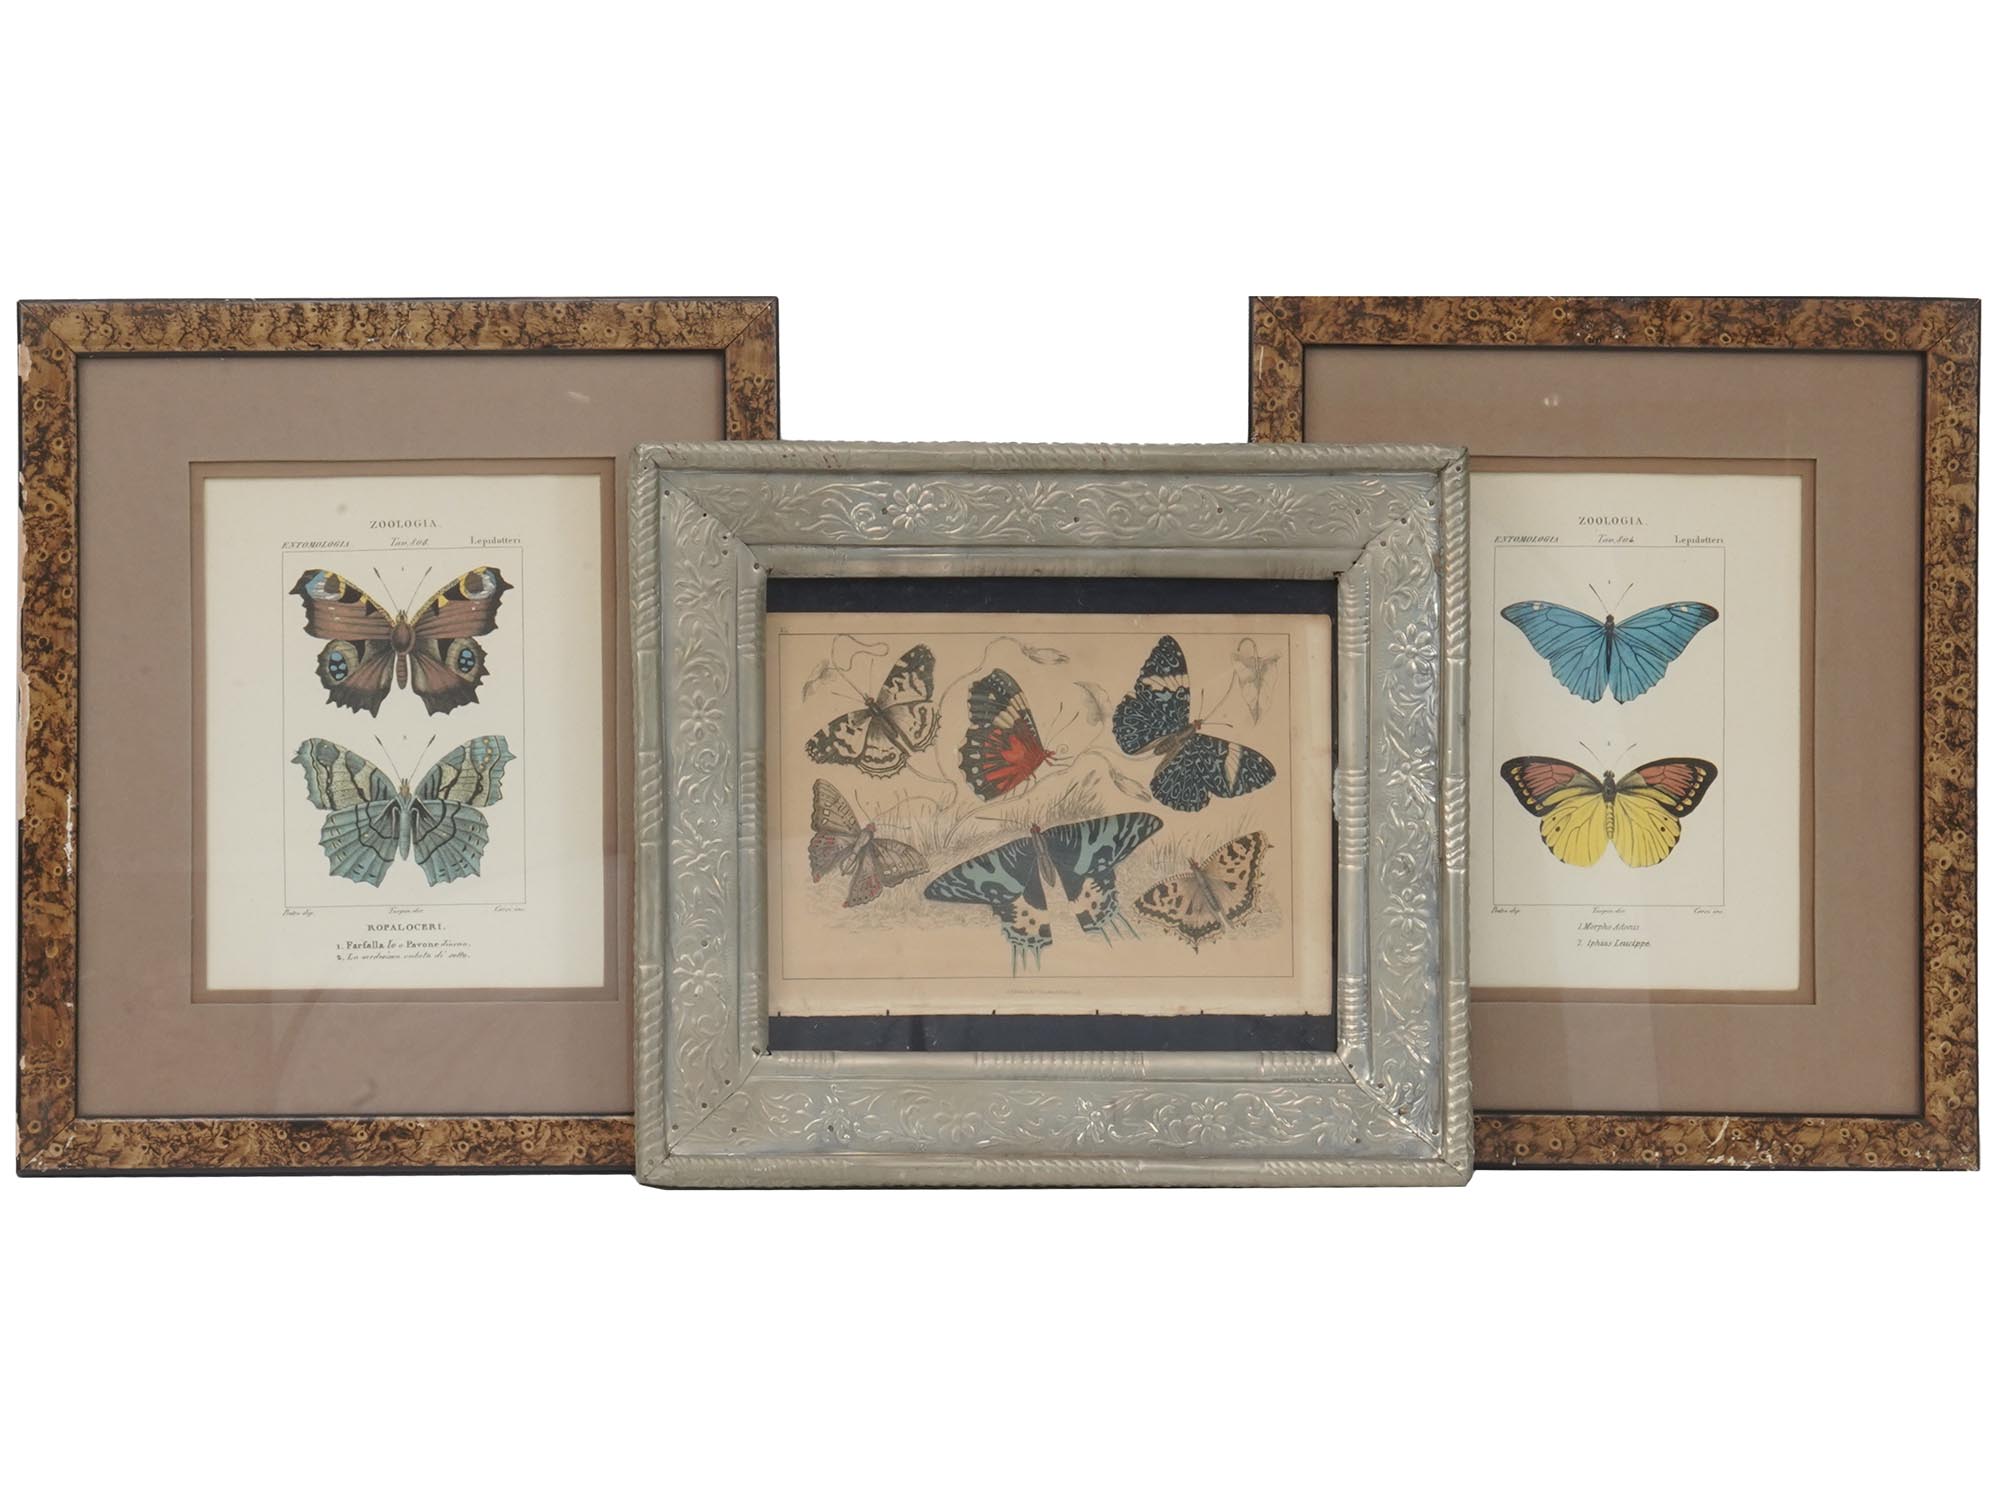 FRAMED BUTTERFLY PRINTS BY P. TURPIN, M.S. MERIAN